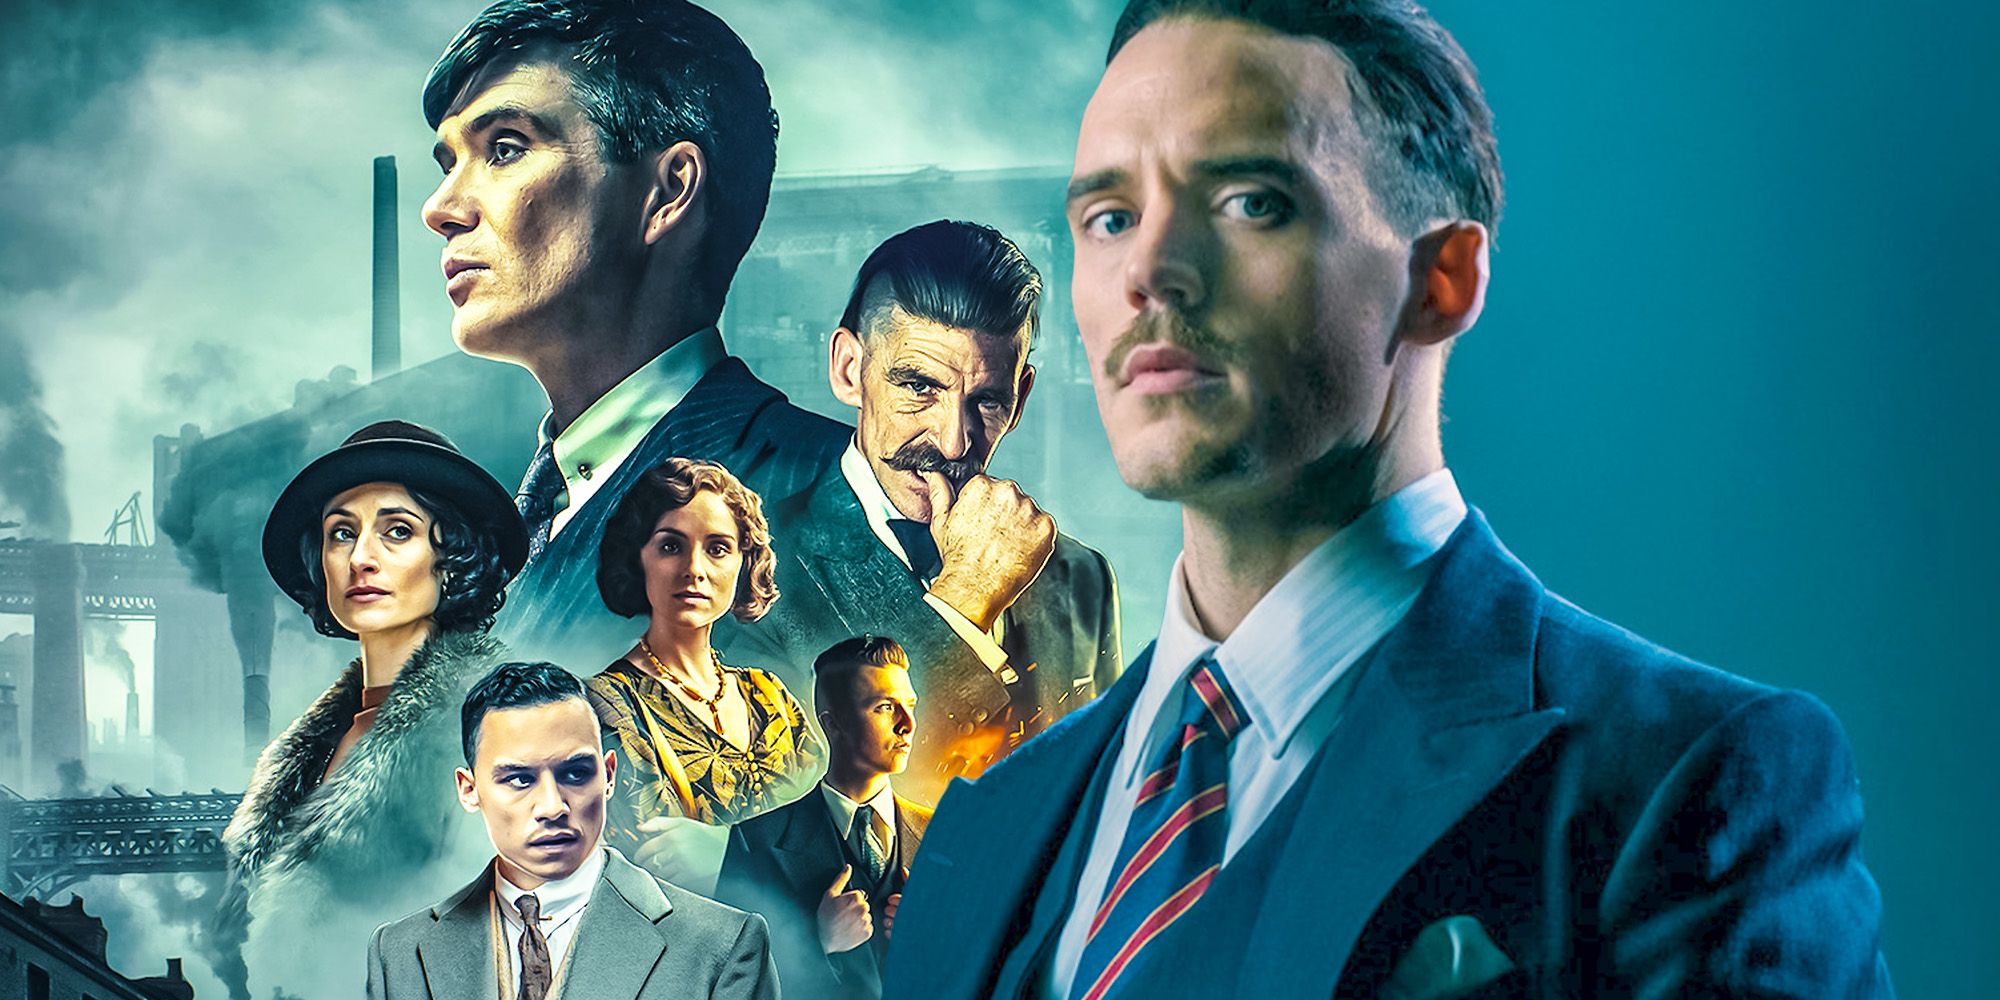 Peaky Blinders: which characters will get their own spin-offs?